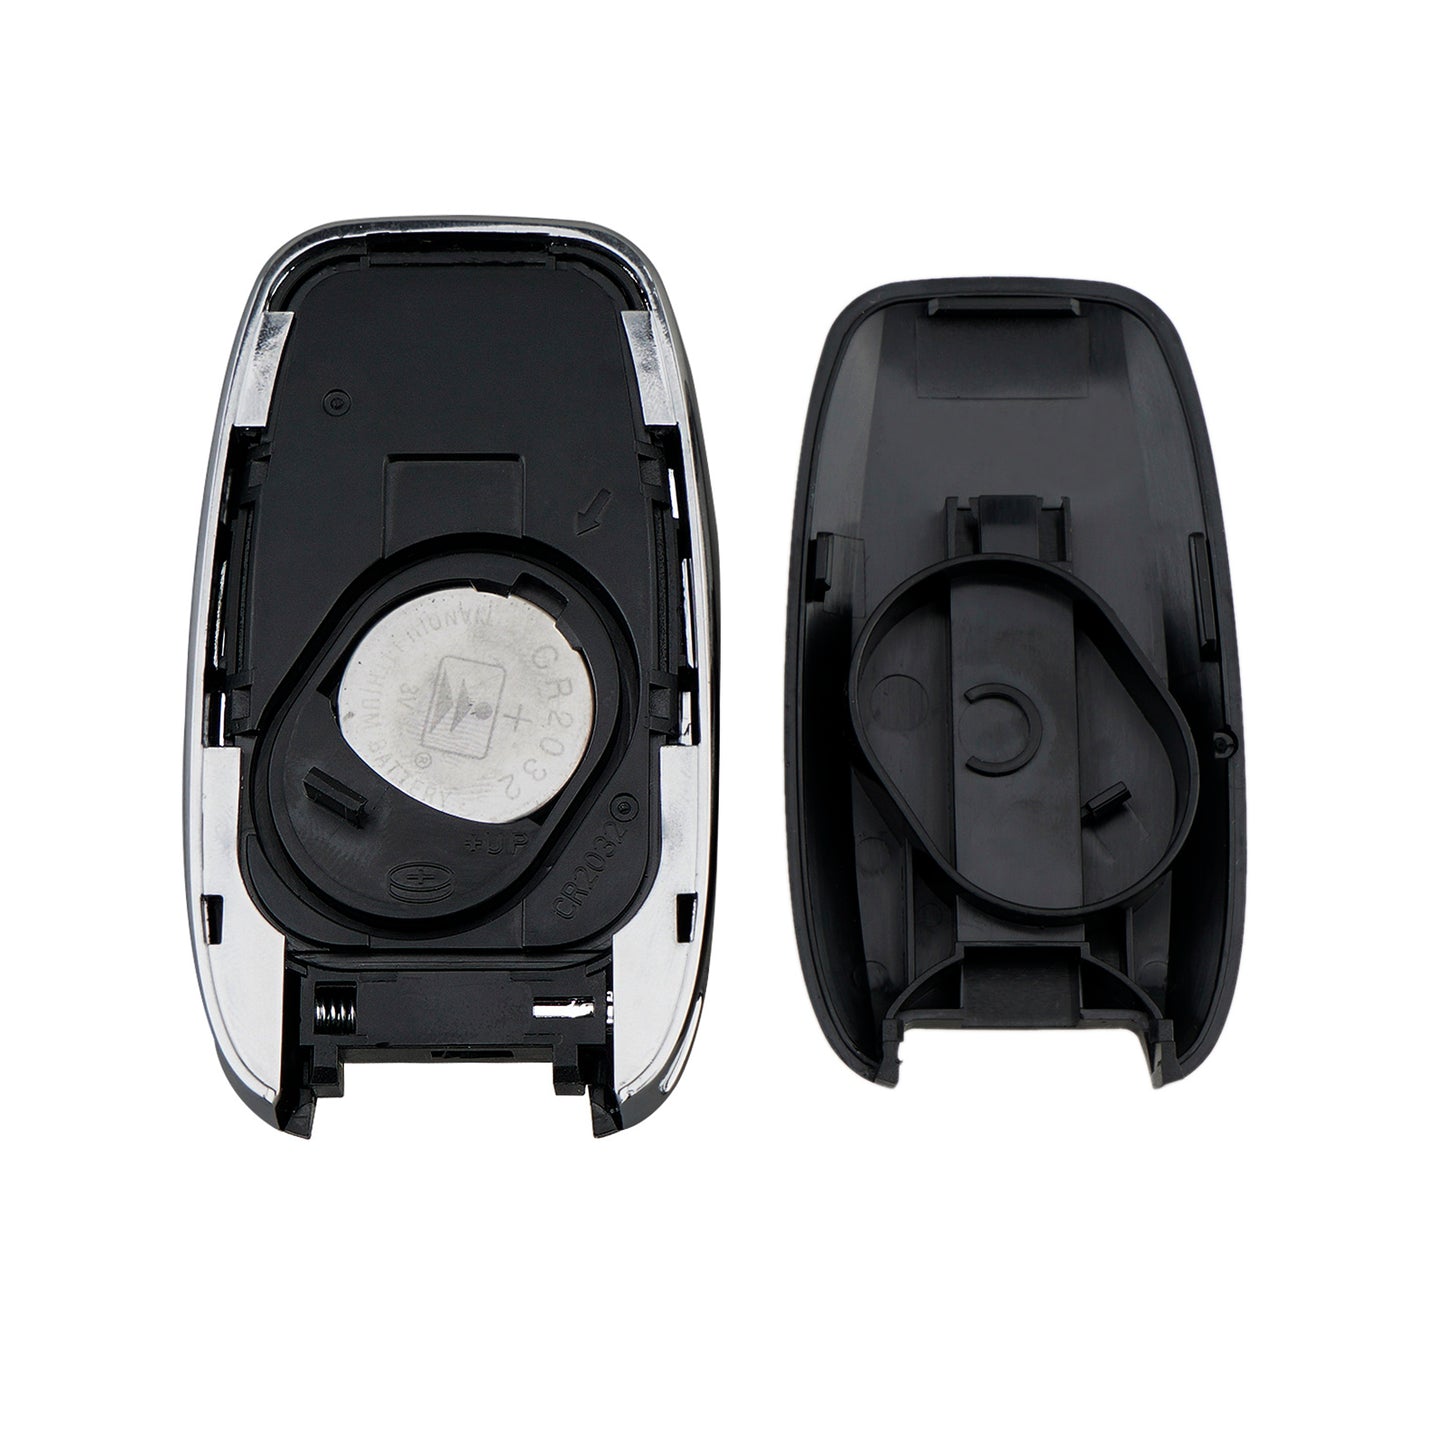 7 Buttons 433MHz Keyless Entry Fob Remote Car Key For 2017-2022 Chrysler Pacifica Limited L Plus Voyager FCC ID: M3N-97395900 SKU : J463